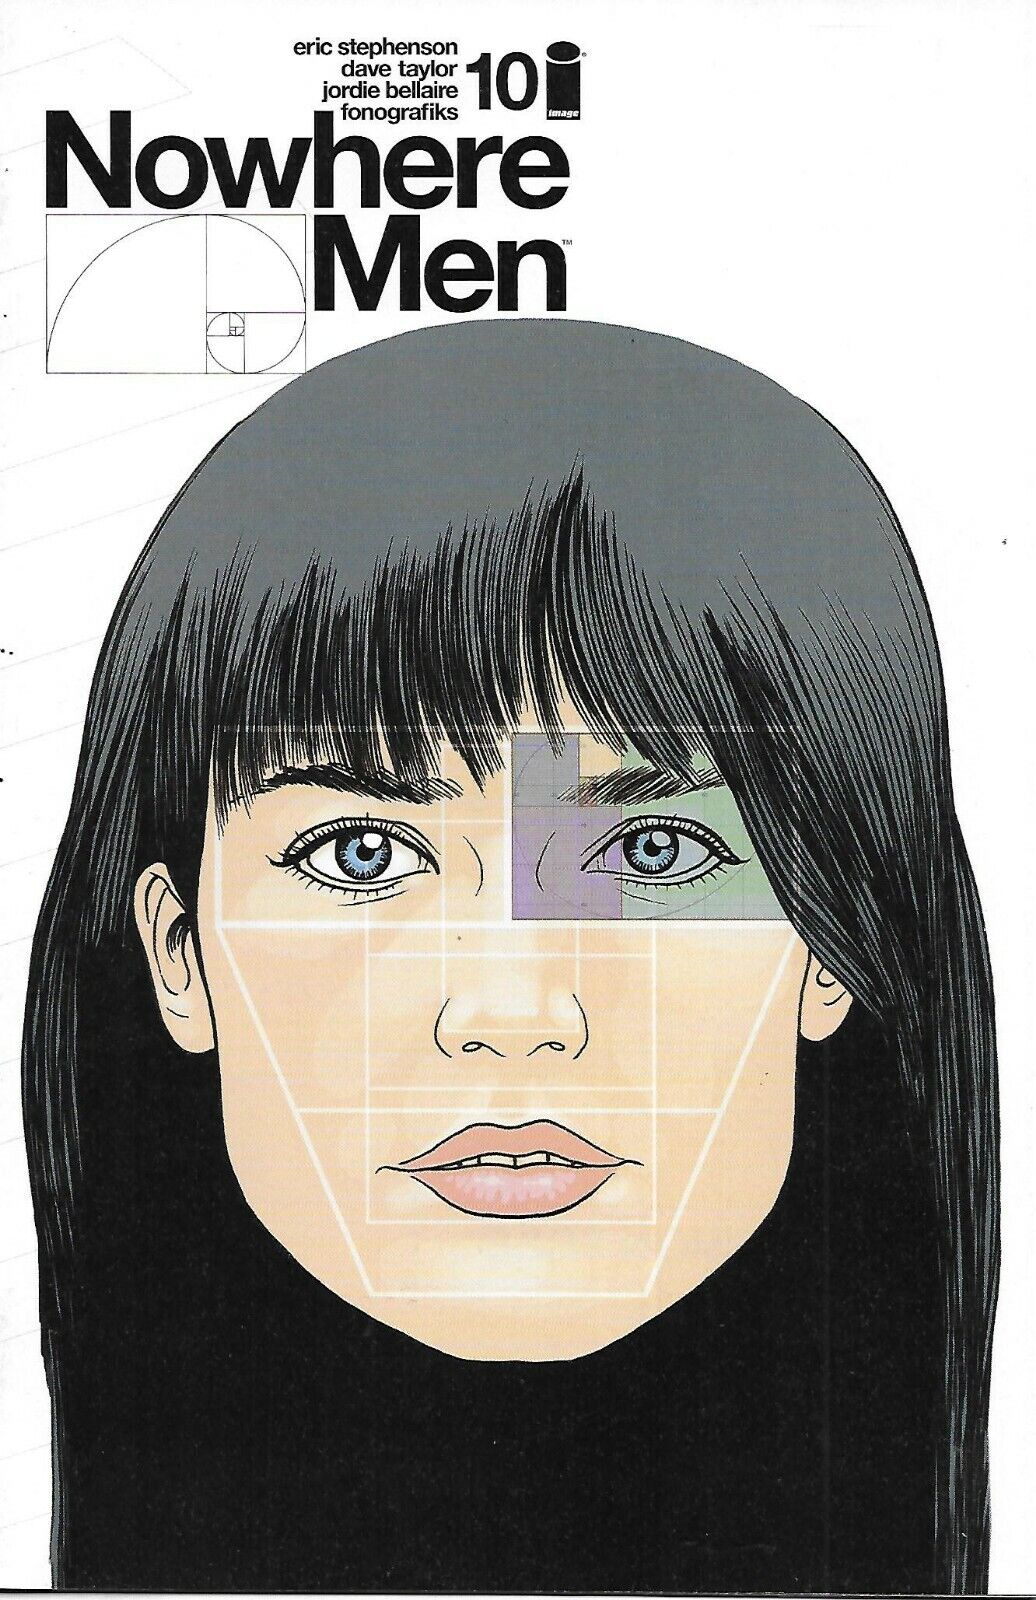 Nowhere Men Comic 10 Cover A First Print 2016 Eric Stephenson Taylor Image .